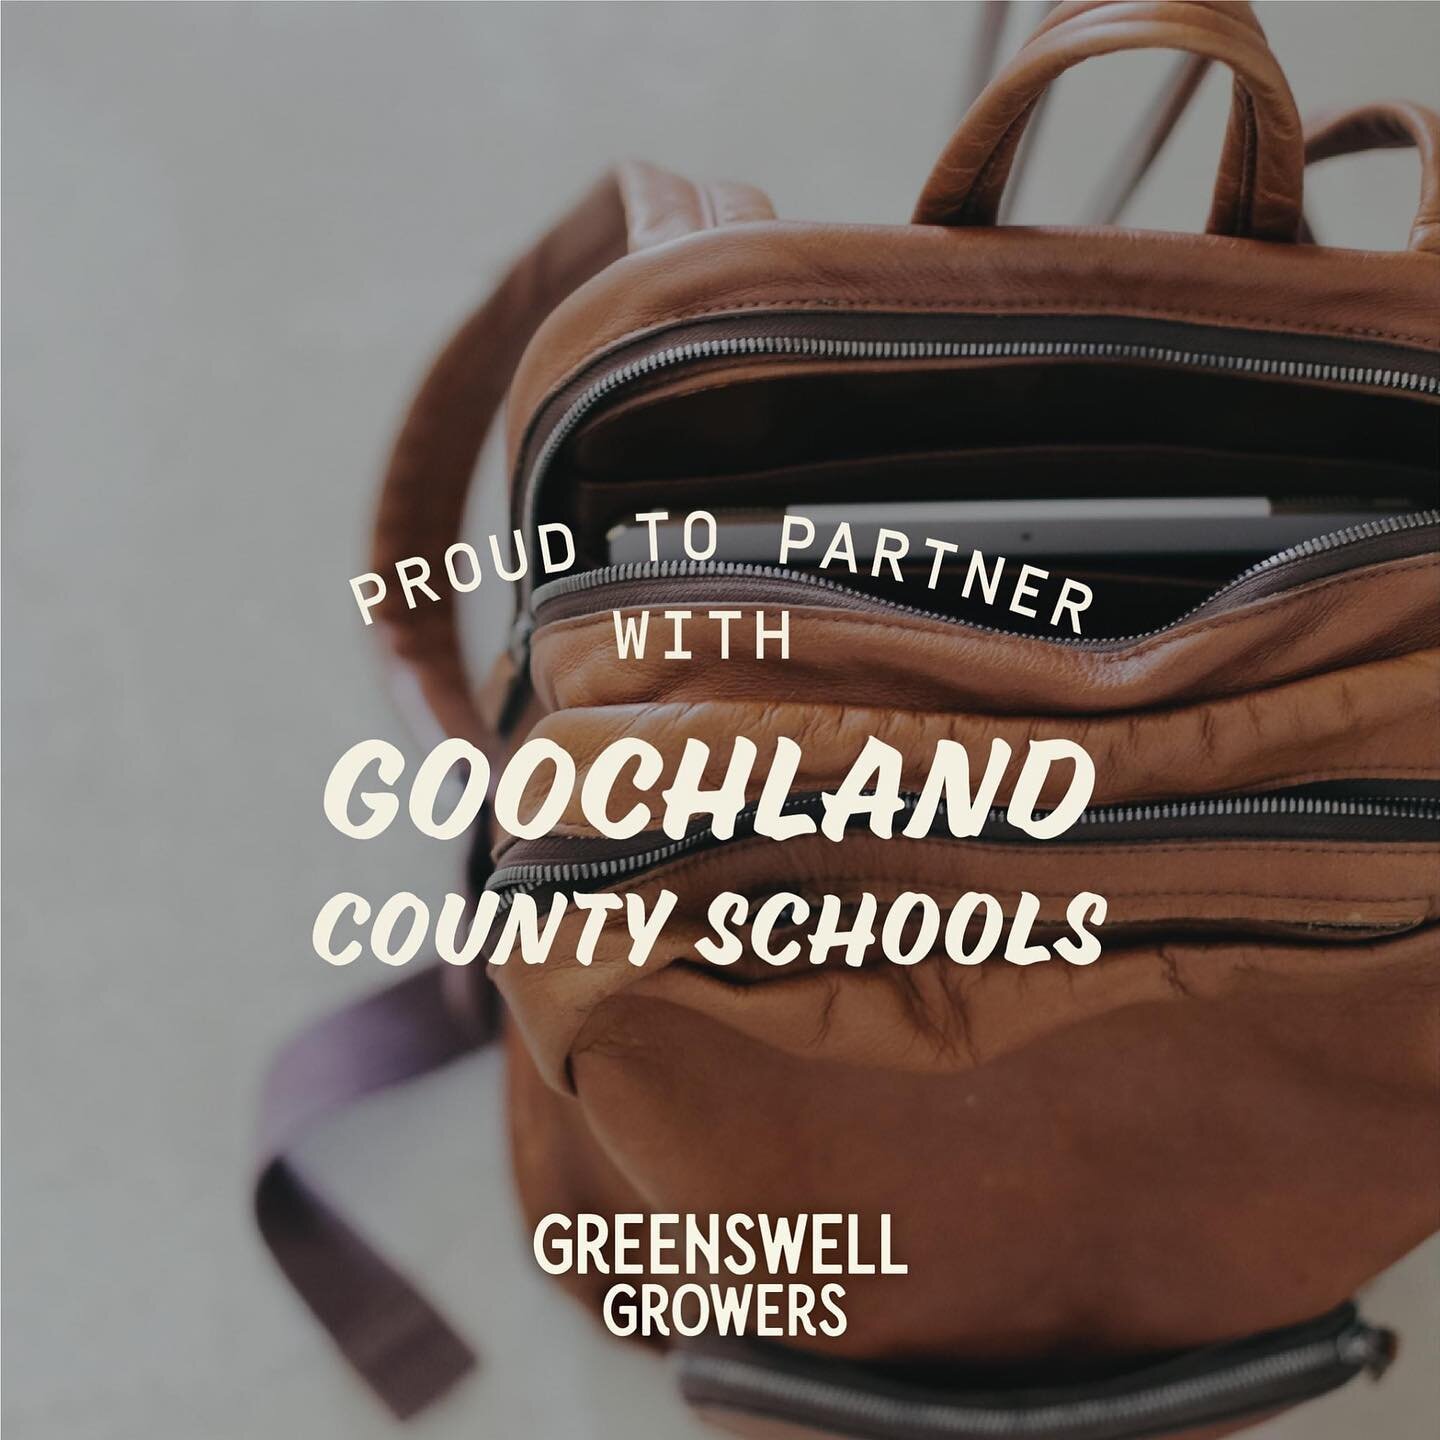 We&rsquo;re honored to invest more than $17 million to establish our new commercial hydroponic greenhouse operation in Goochland County&rsquo;s West Creek Industrial Park that will provide internship and learning opportunities for @goochlandschools s